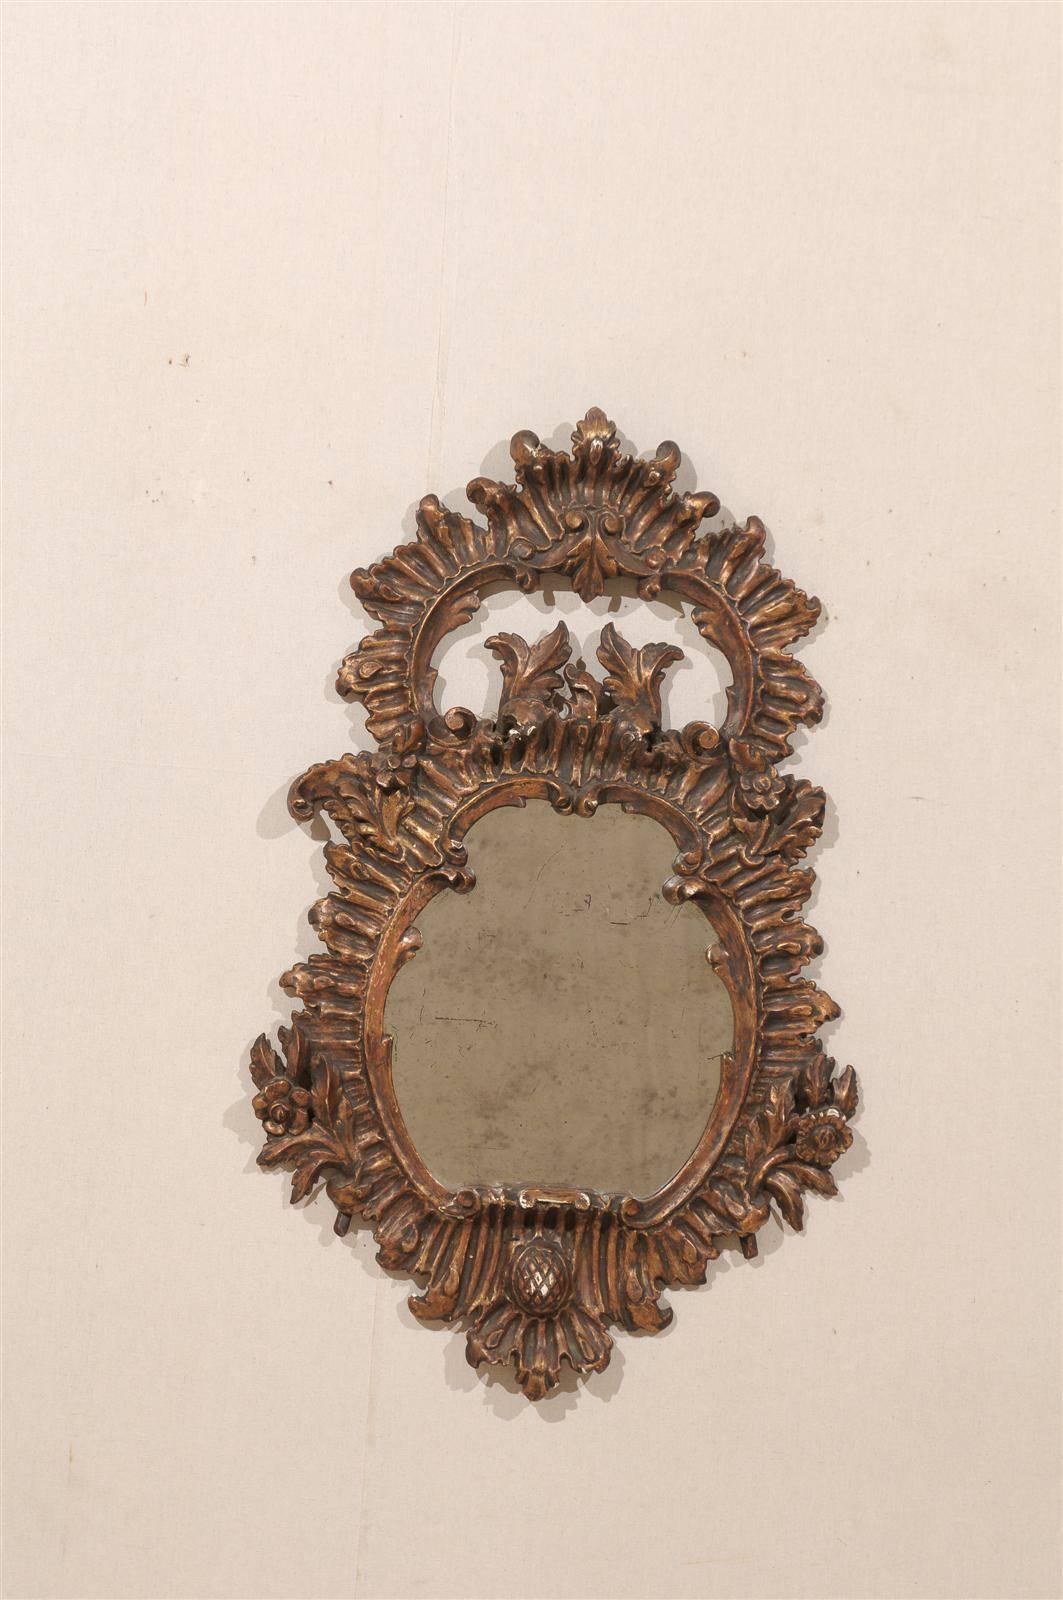 A 19th century richly carved Italian wooden mirror with foliage décor and discreet flowers. Wonderfully carved crest at the top.